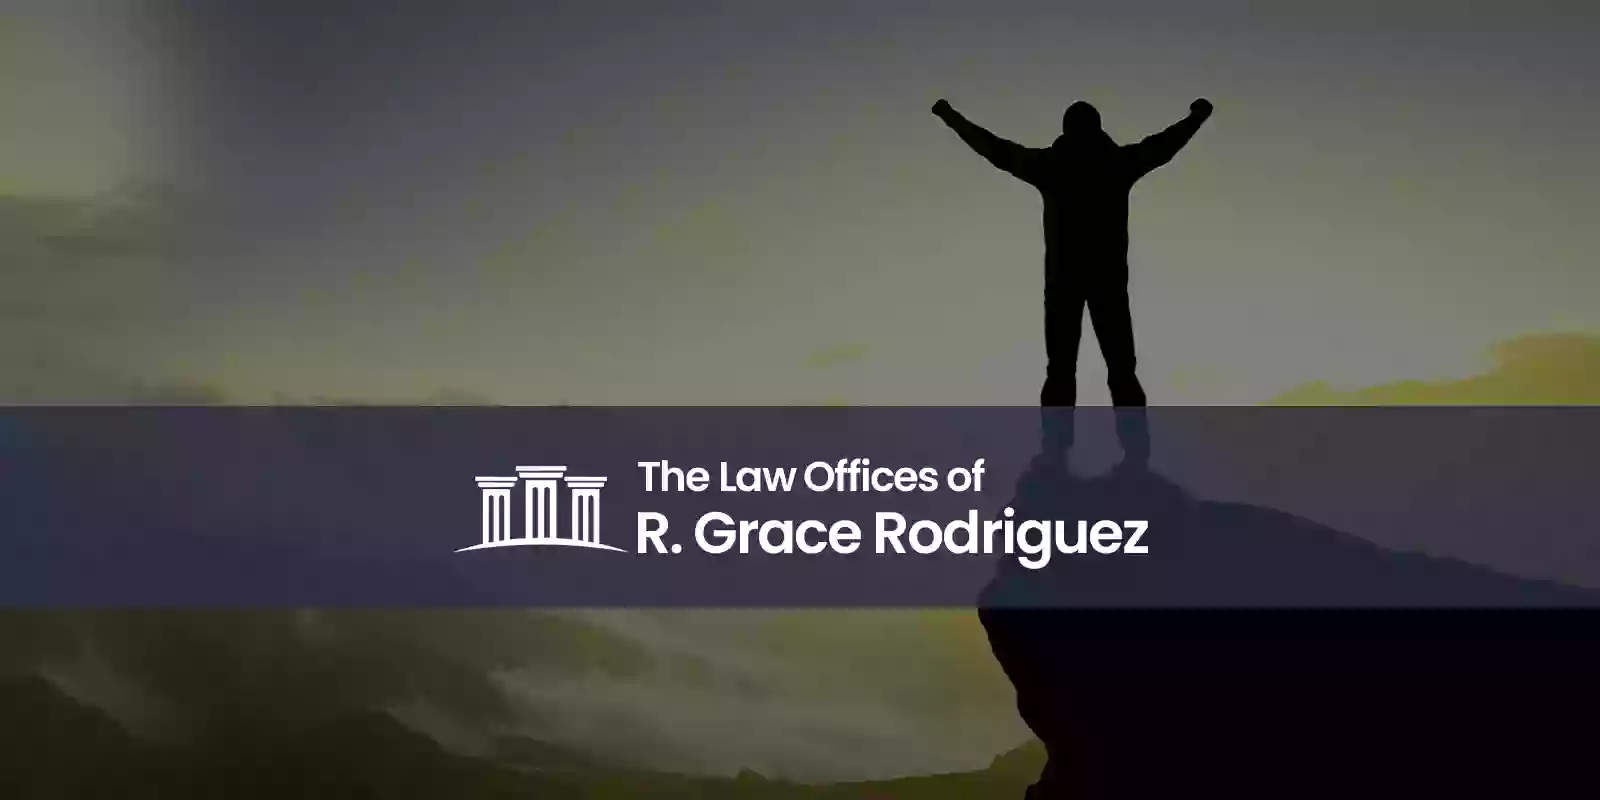 Law Offices of R. Grace Rodriguez